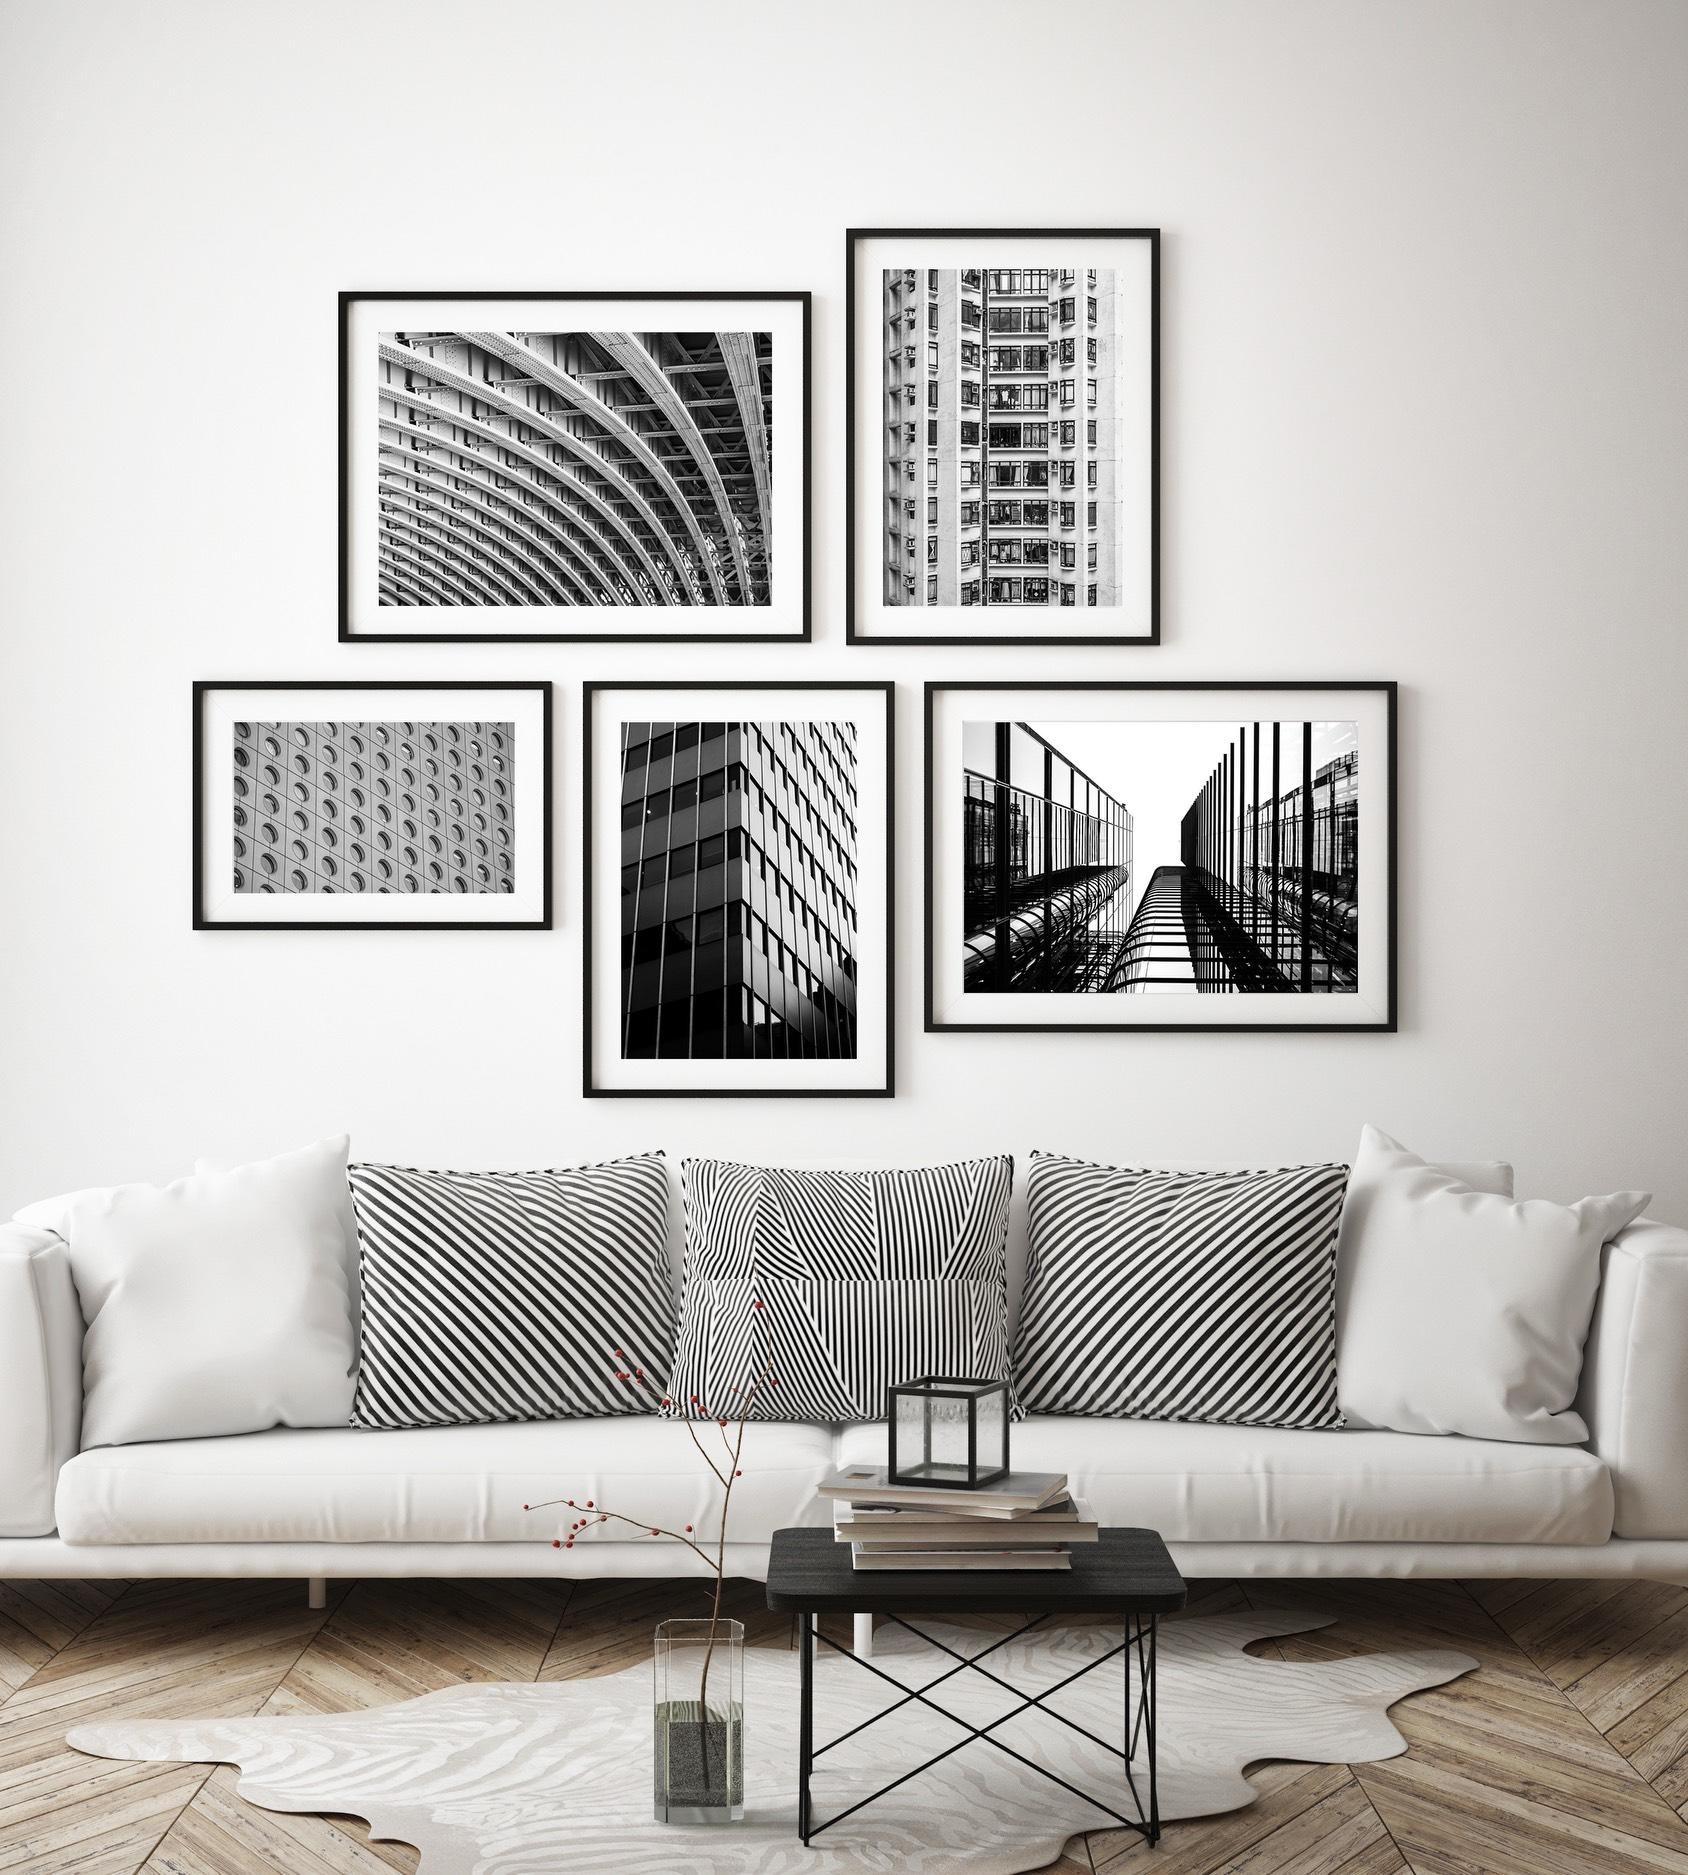 A gallery wall art collection called Circles and Lines